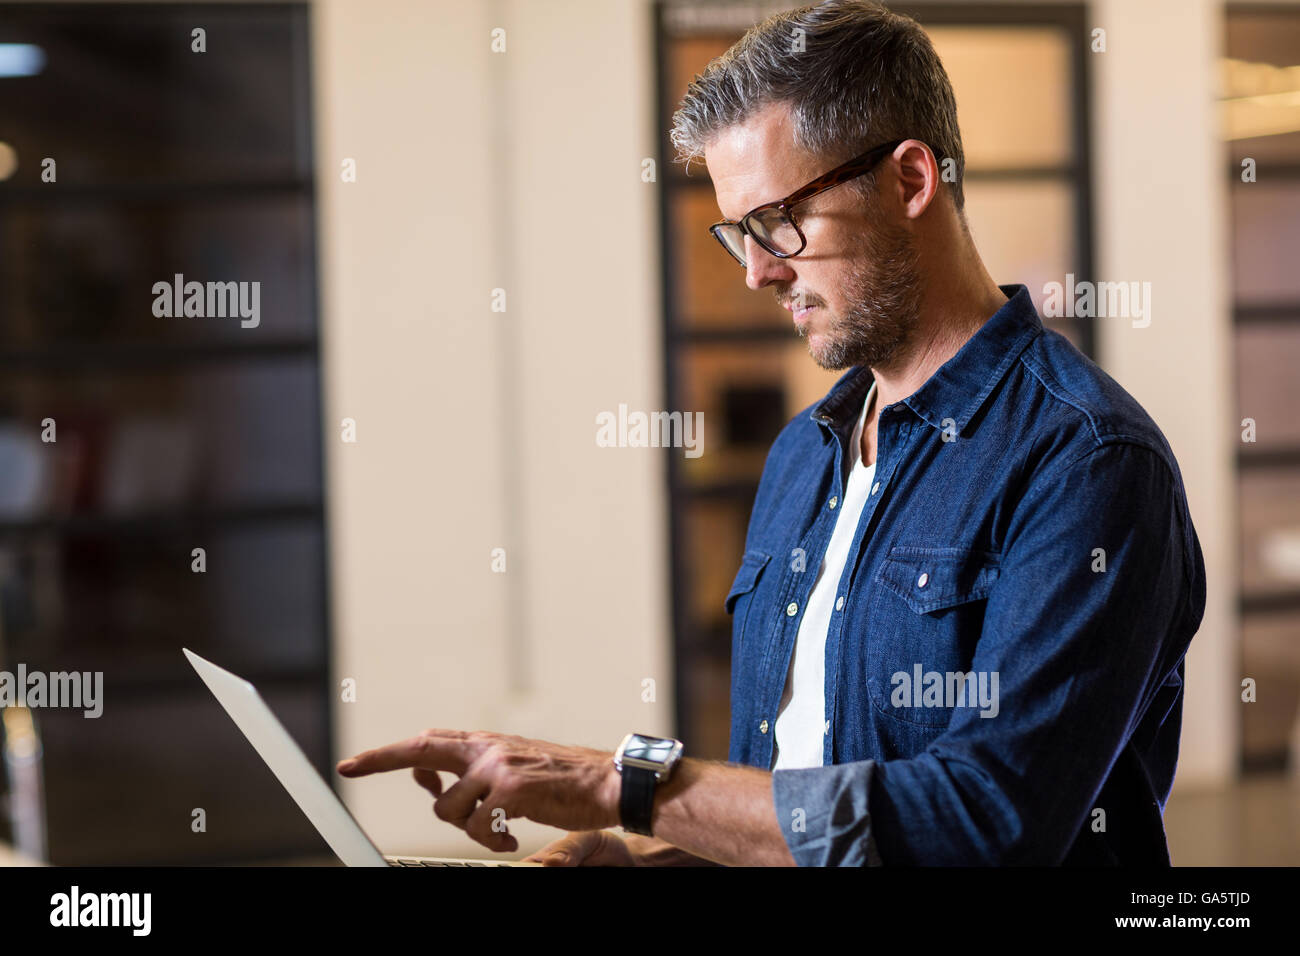 Man using laptop in office Banque D'Images